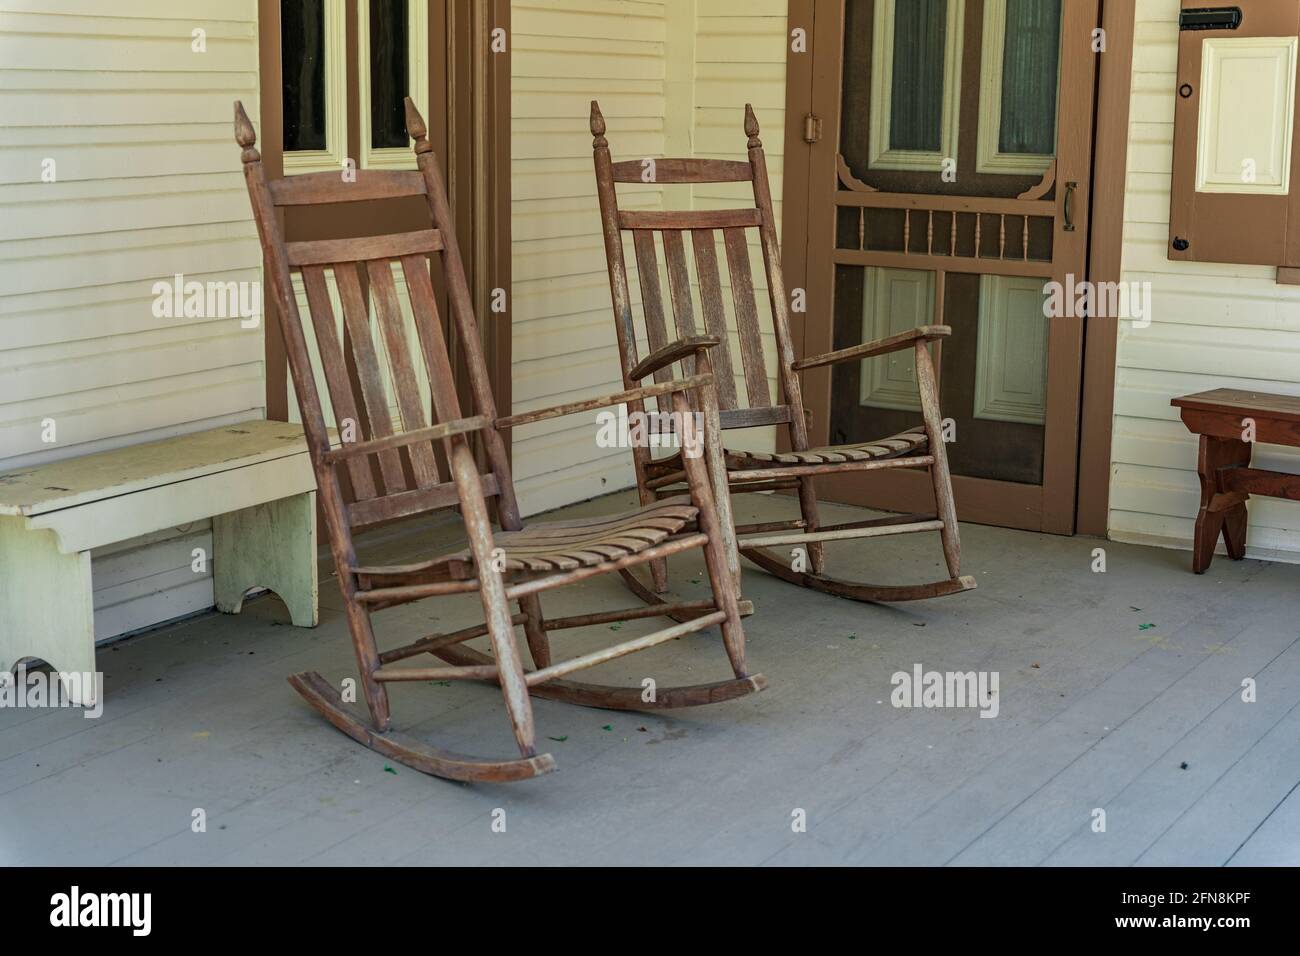 A pair of rocking chairs on a country porch. Stock Photo